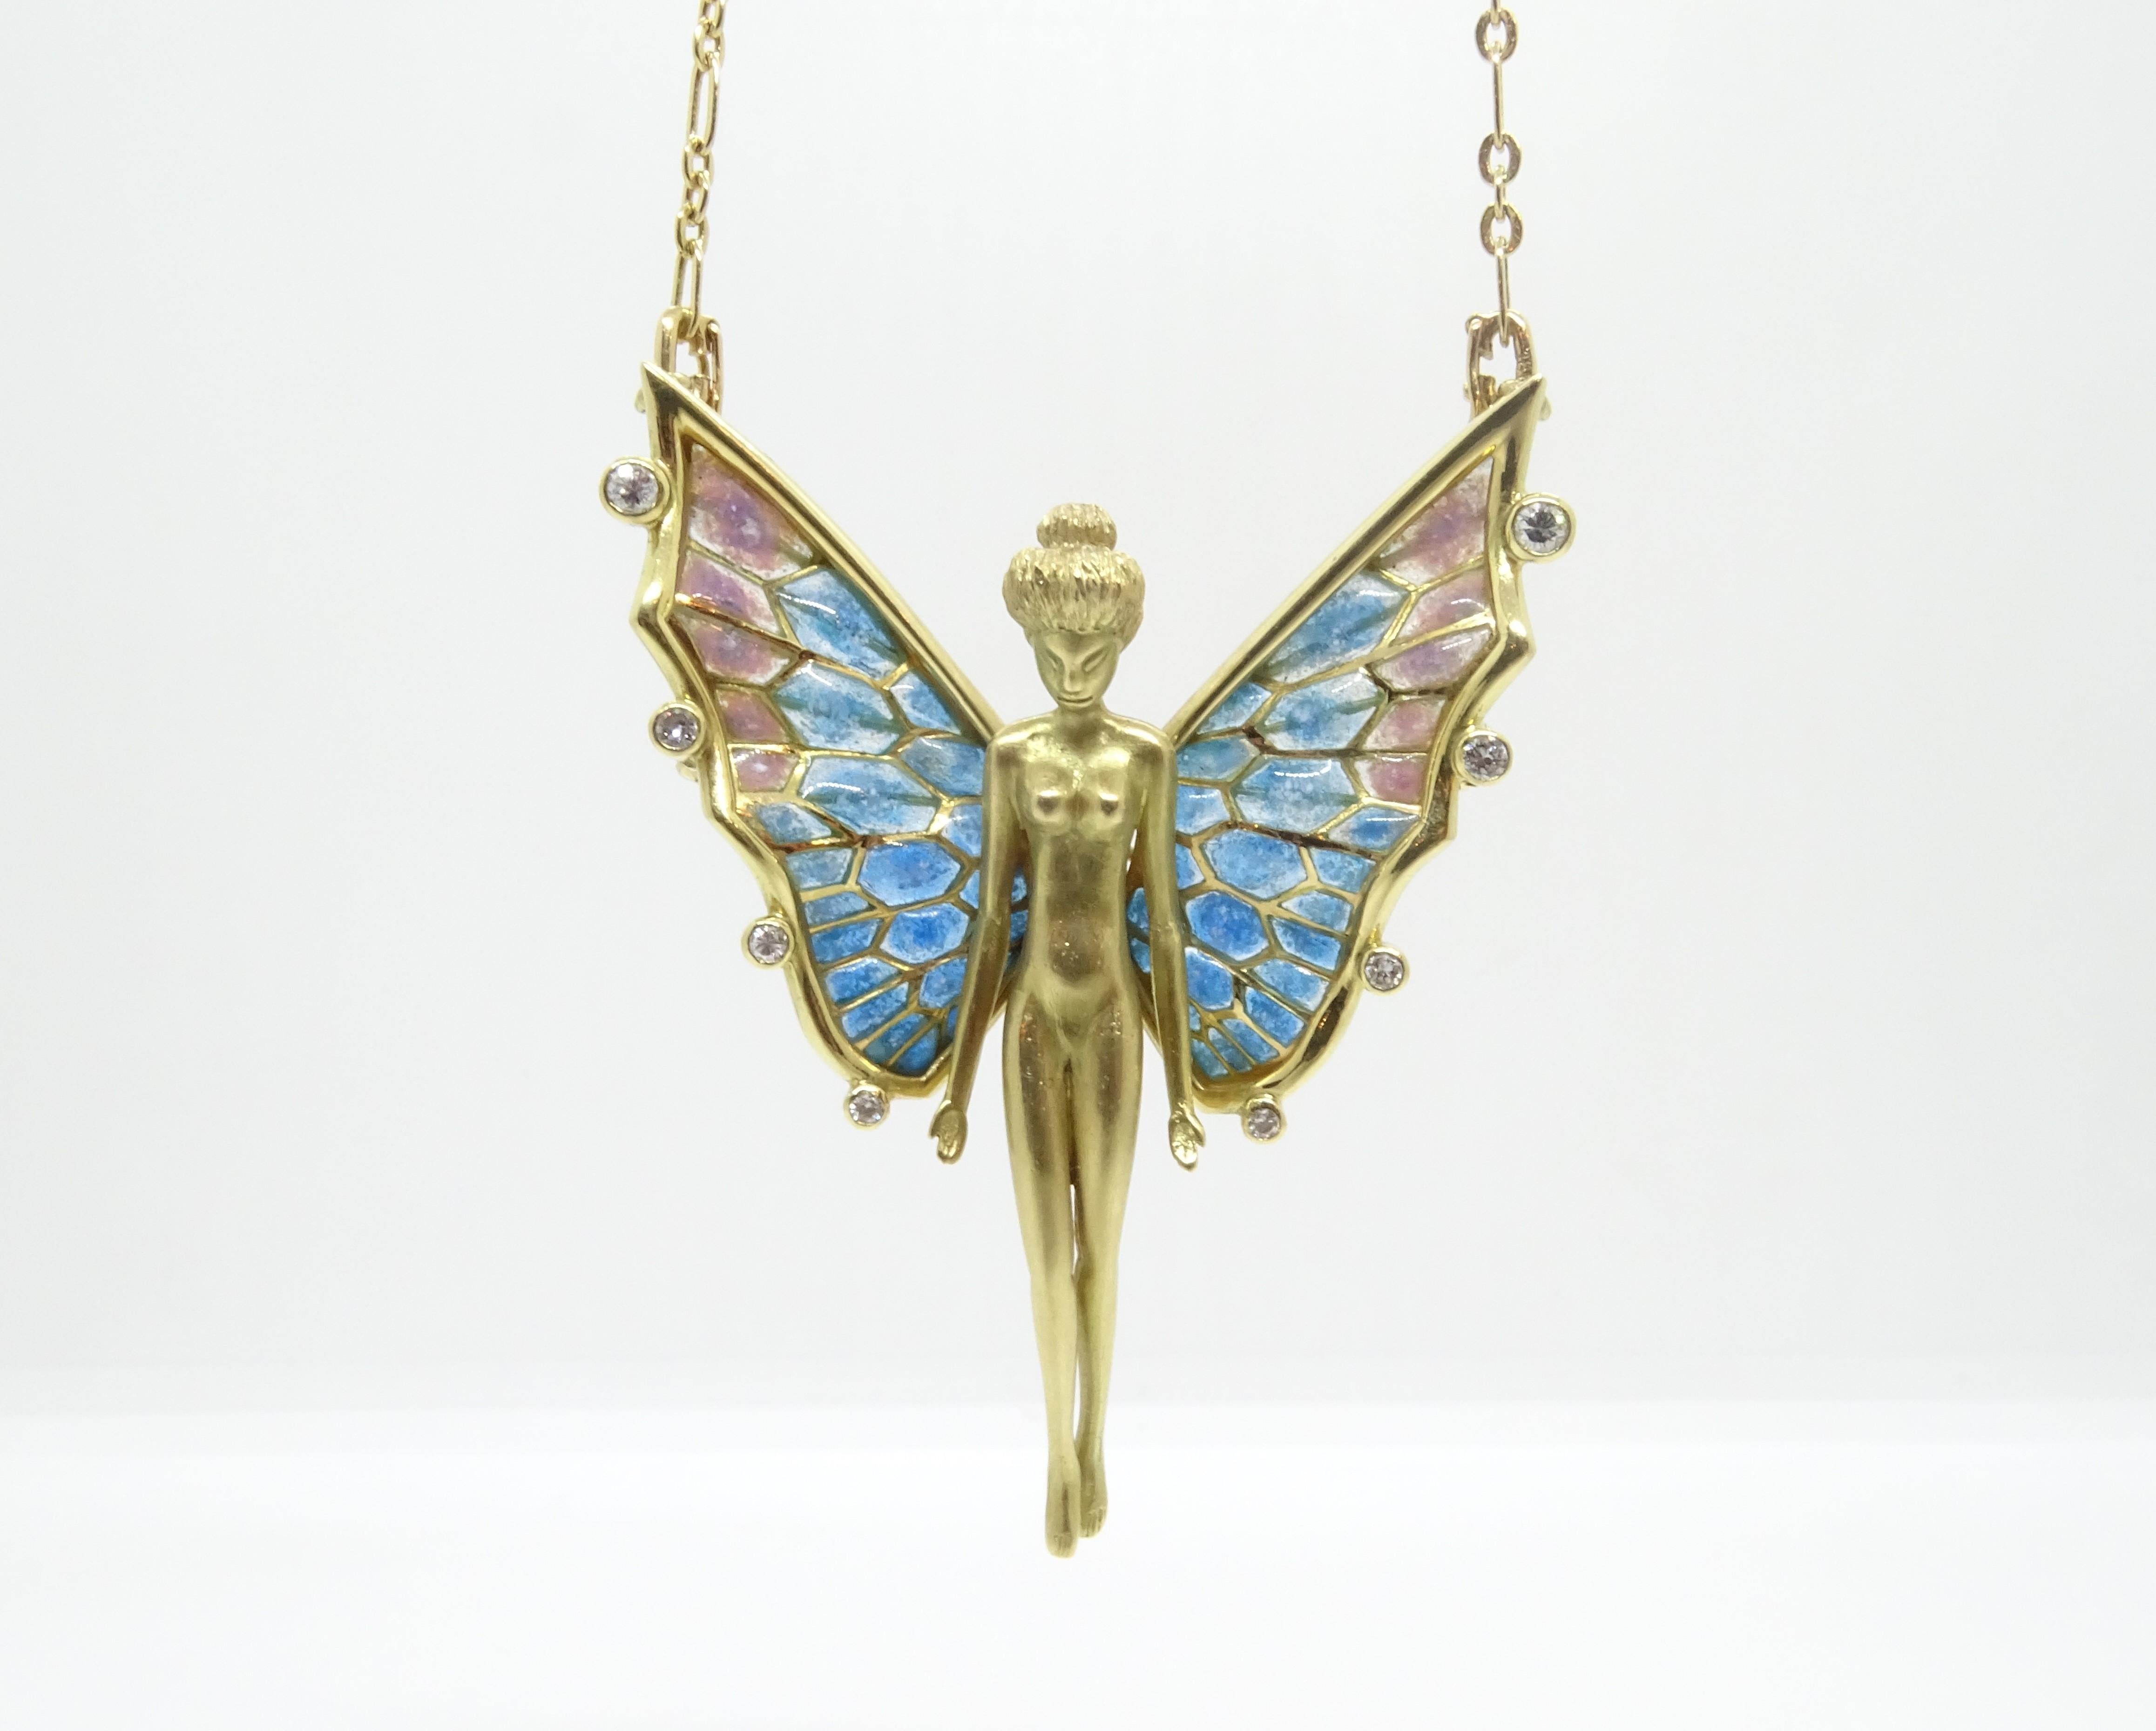 One of a kind Chain with a fairy or nymph pendant, in 18k gold, enamel and small diamonds, following the modernist style of the great Catalan jeweler Lluís Masriera.

The movement, which emerged at the end of the 19th century, is characterized by